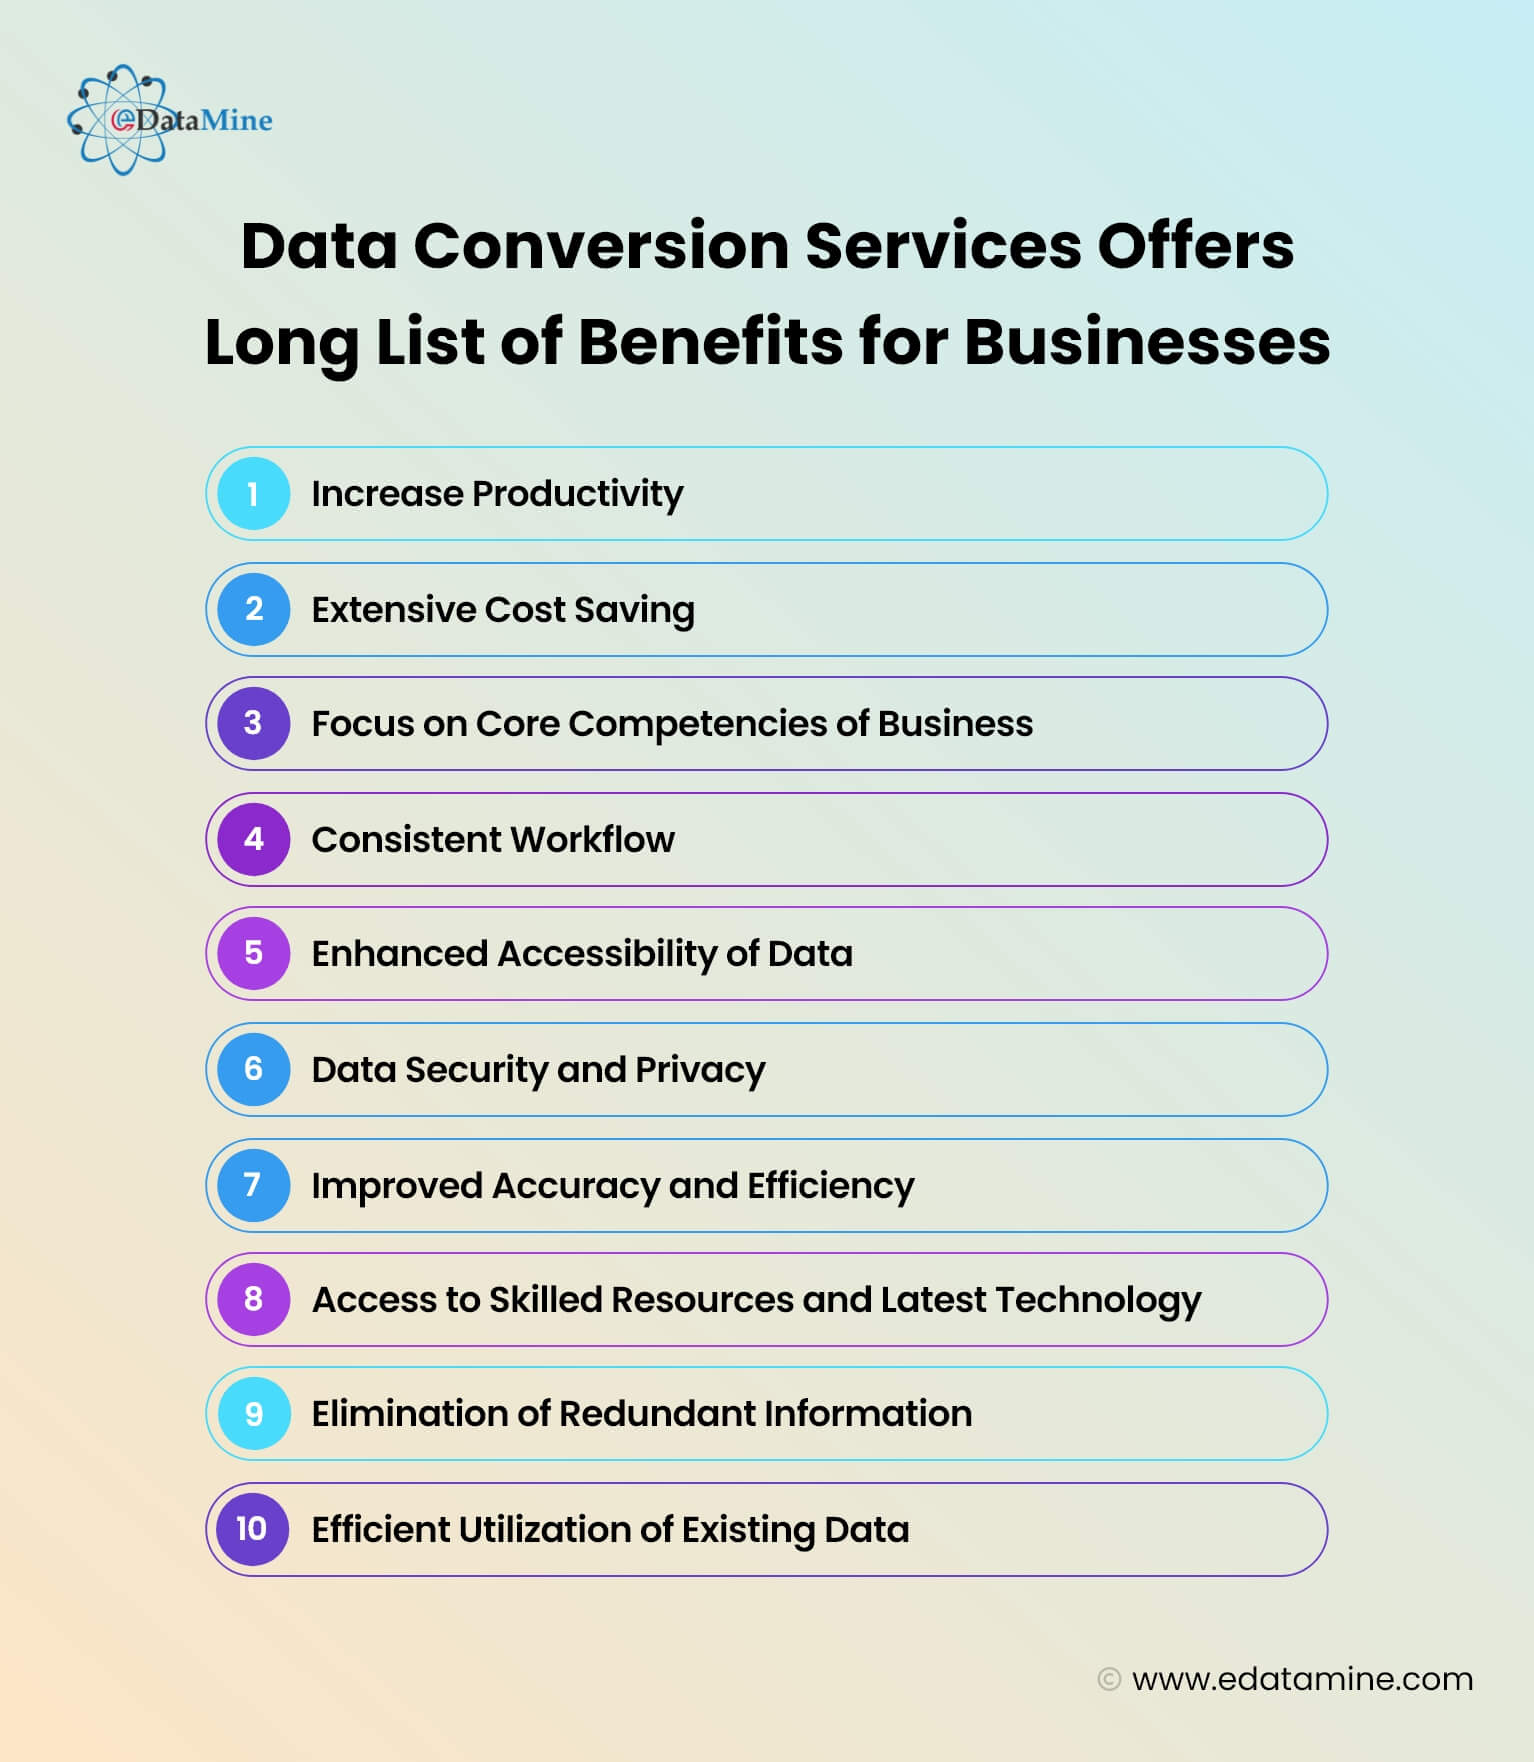 Data Conversion Services Offers Long List of Benefits for Businesses